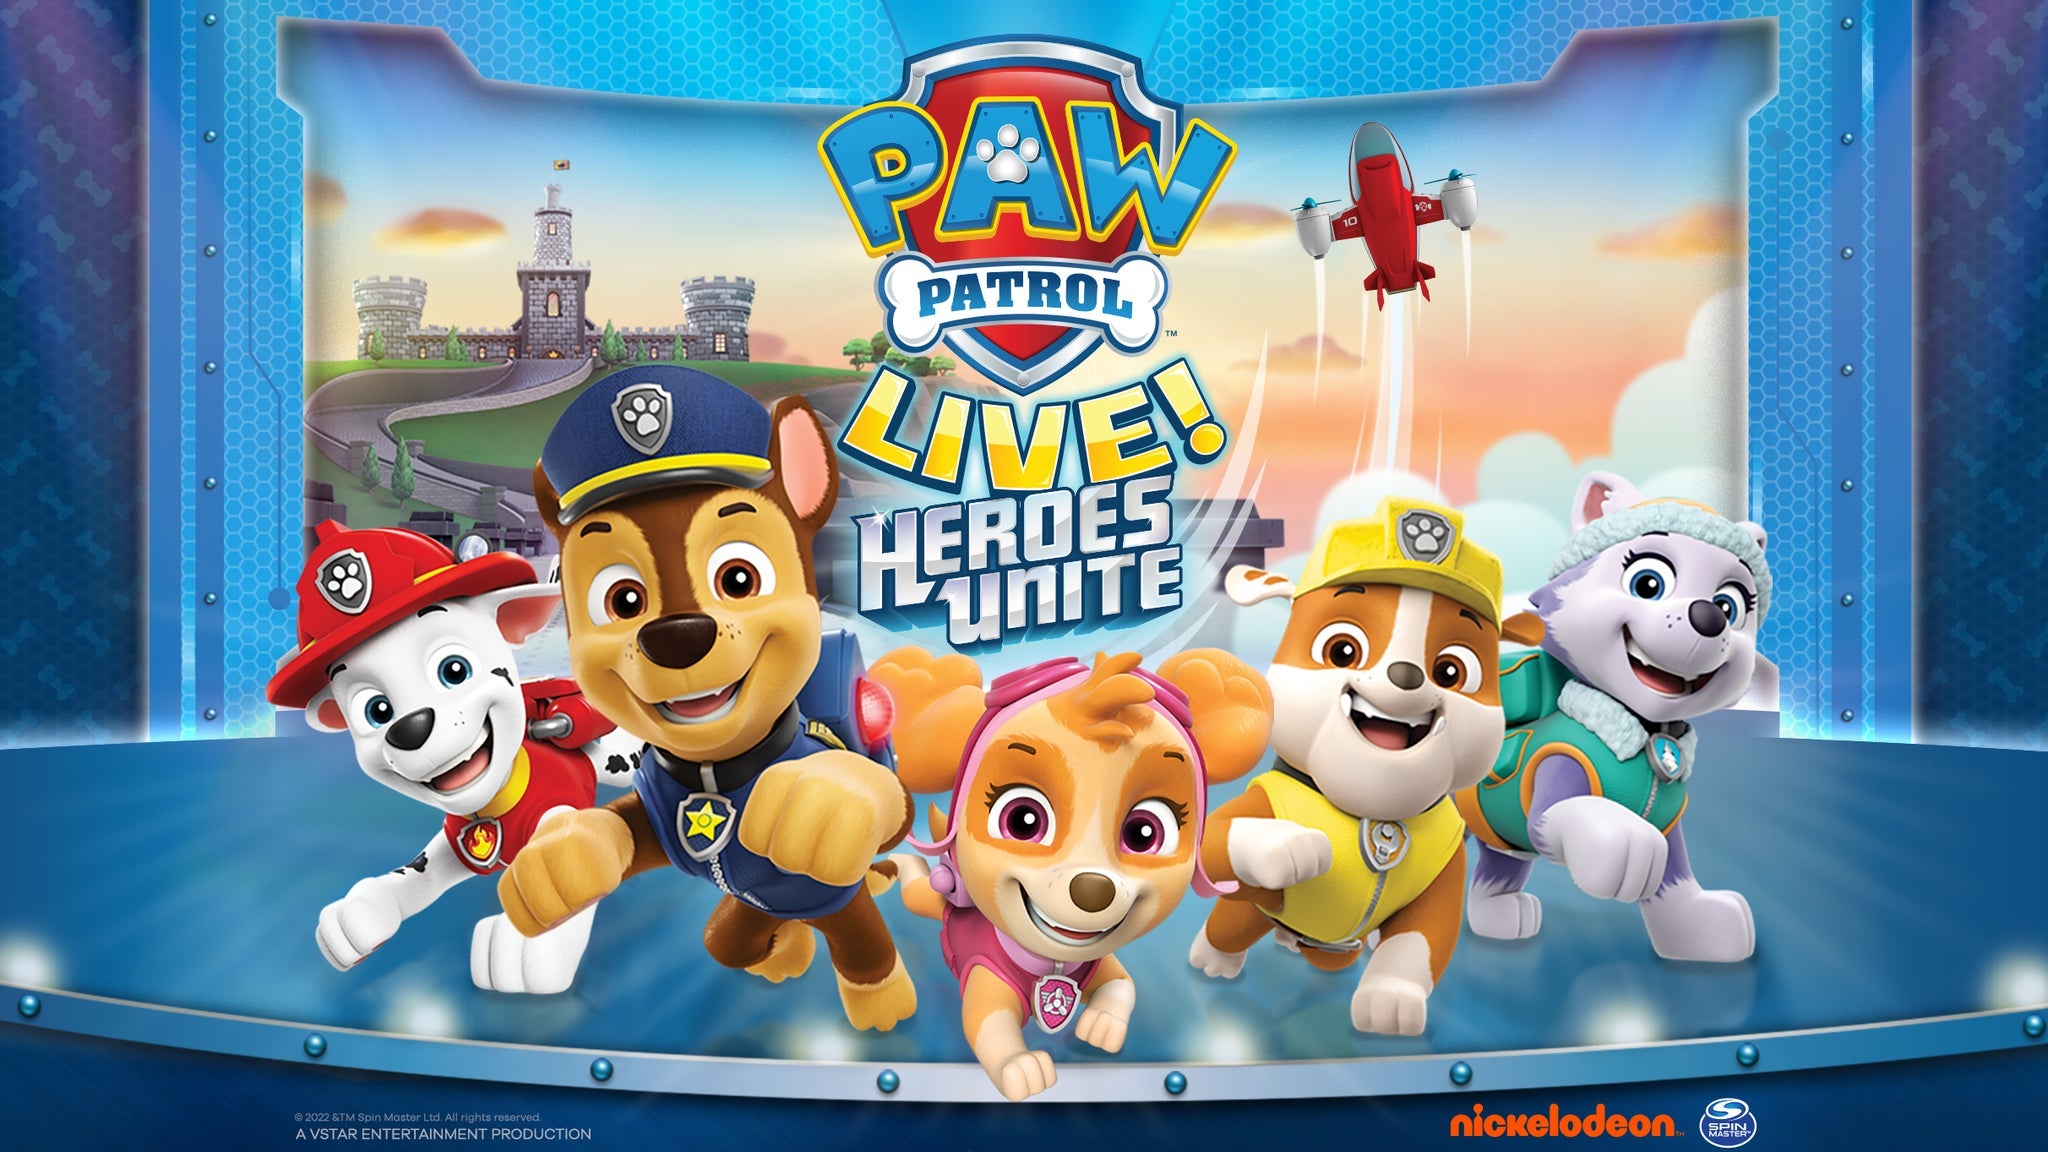 exclusive presale code for PAW Patrol Live!: Heroes Unite tickets in Toronto